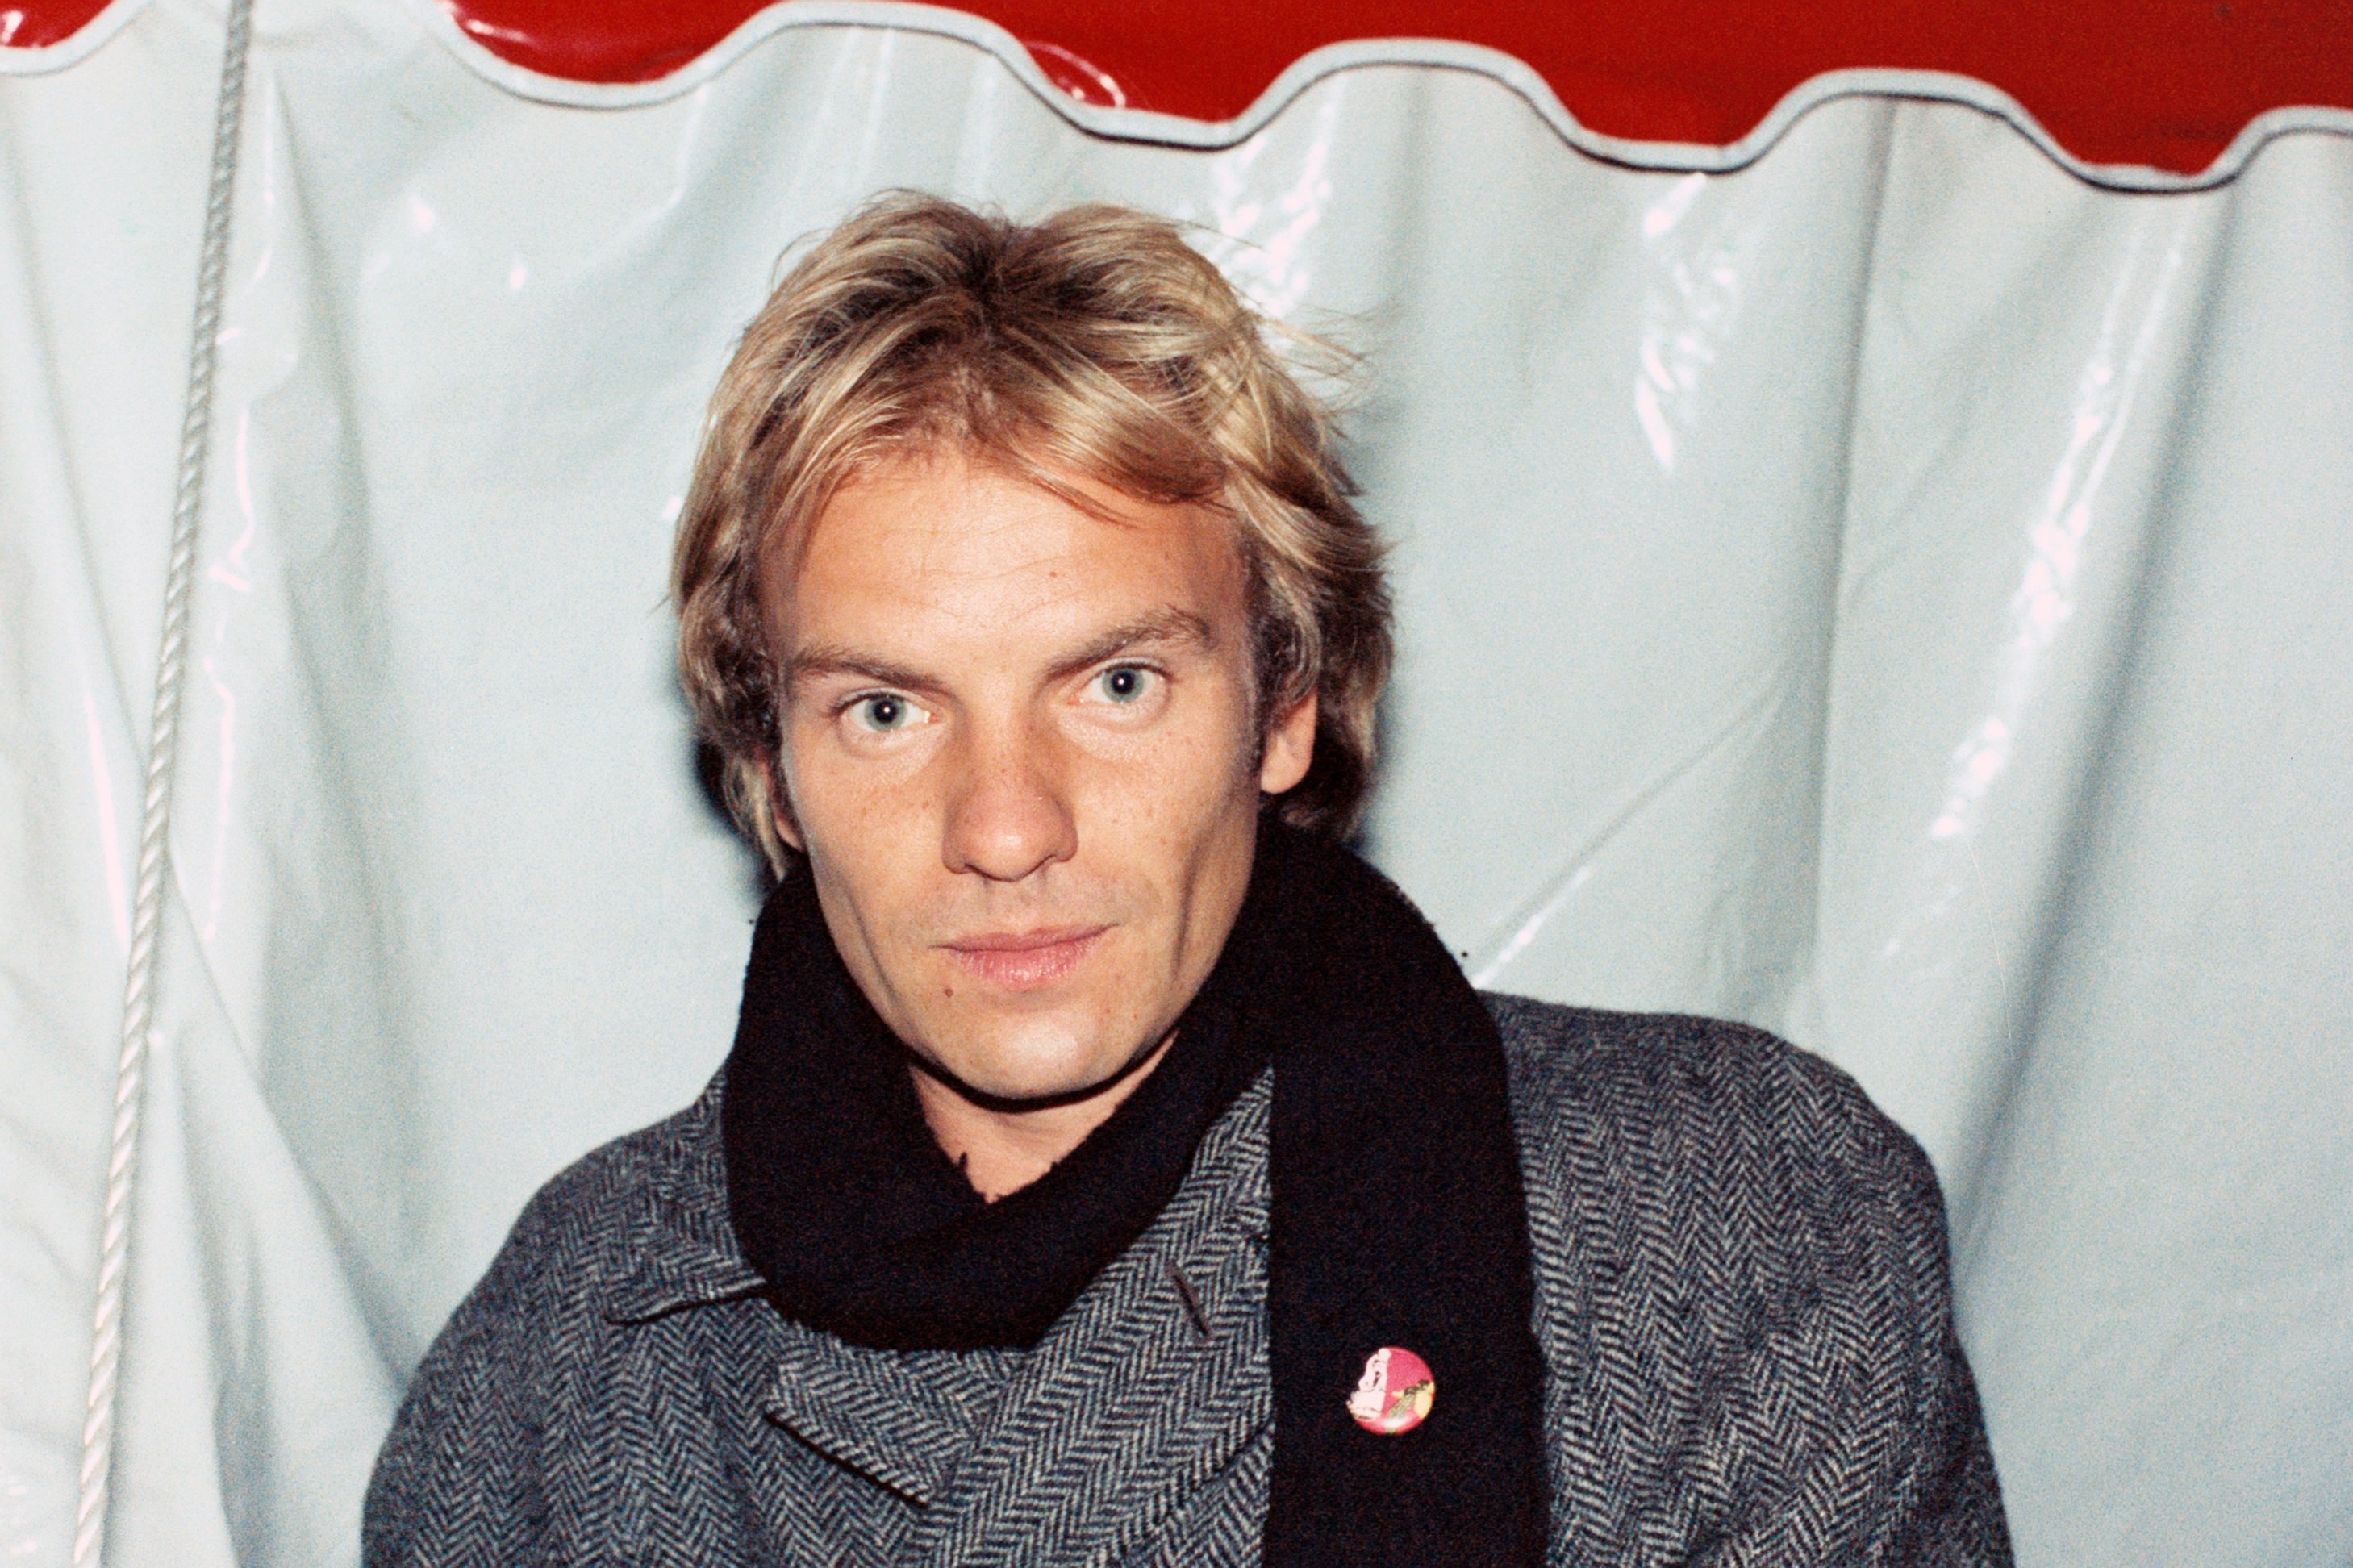 The Police's Sting wearing a scarf